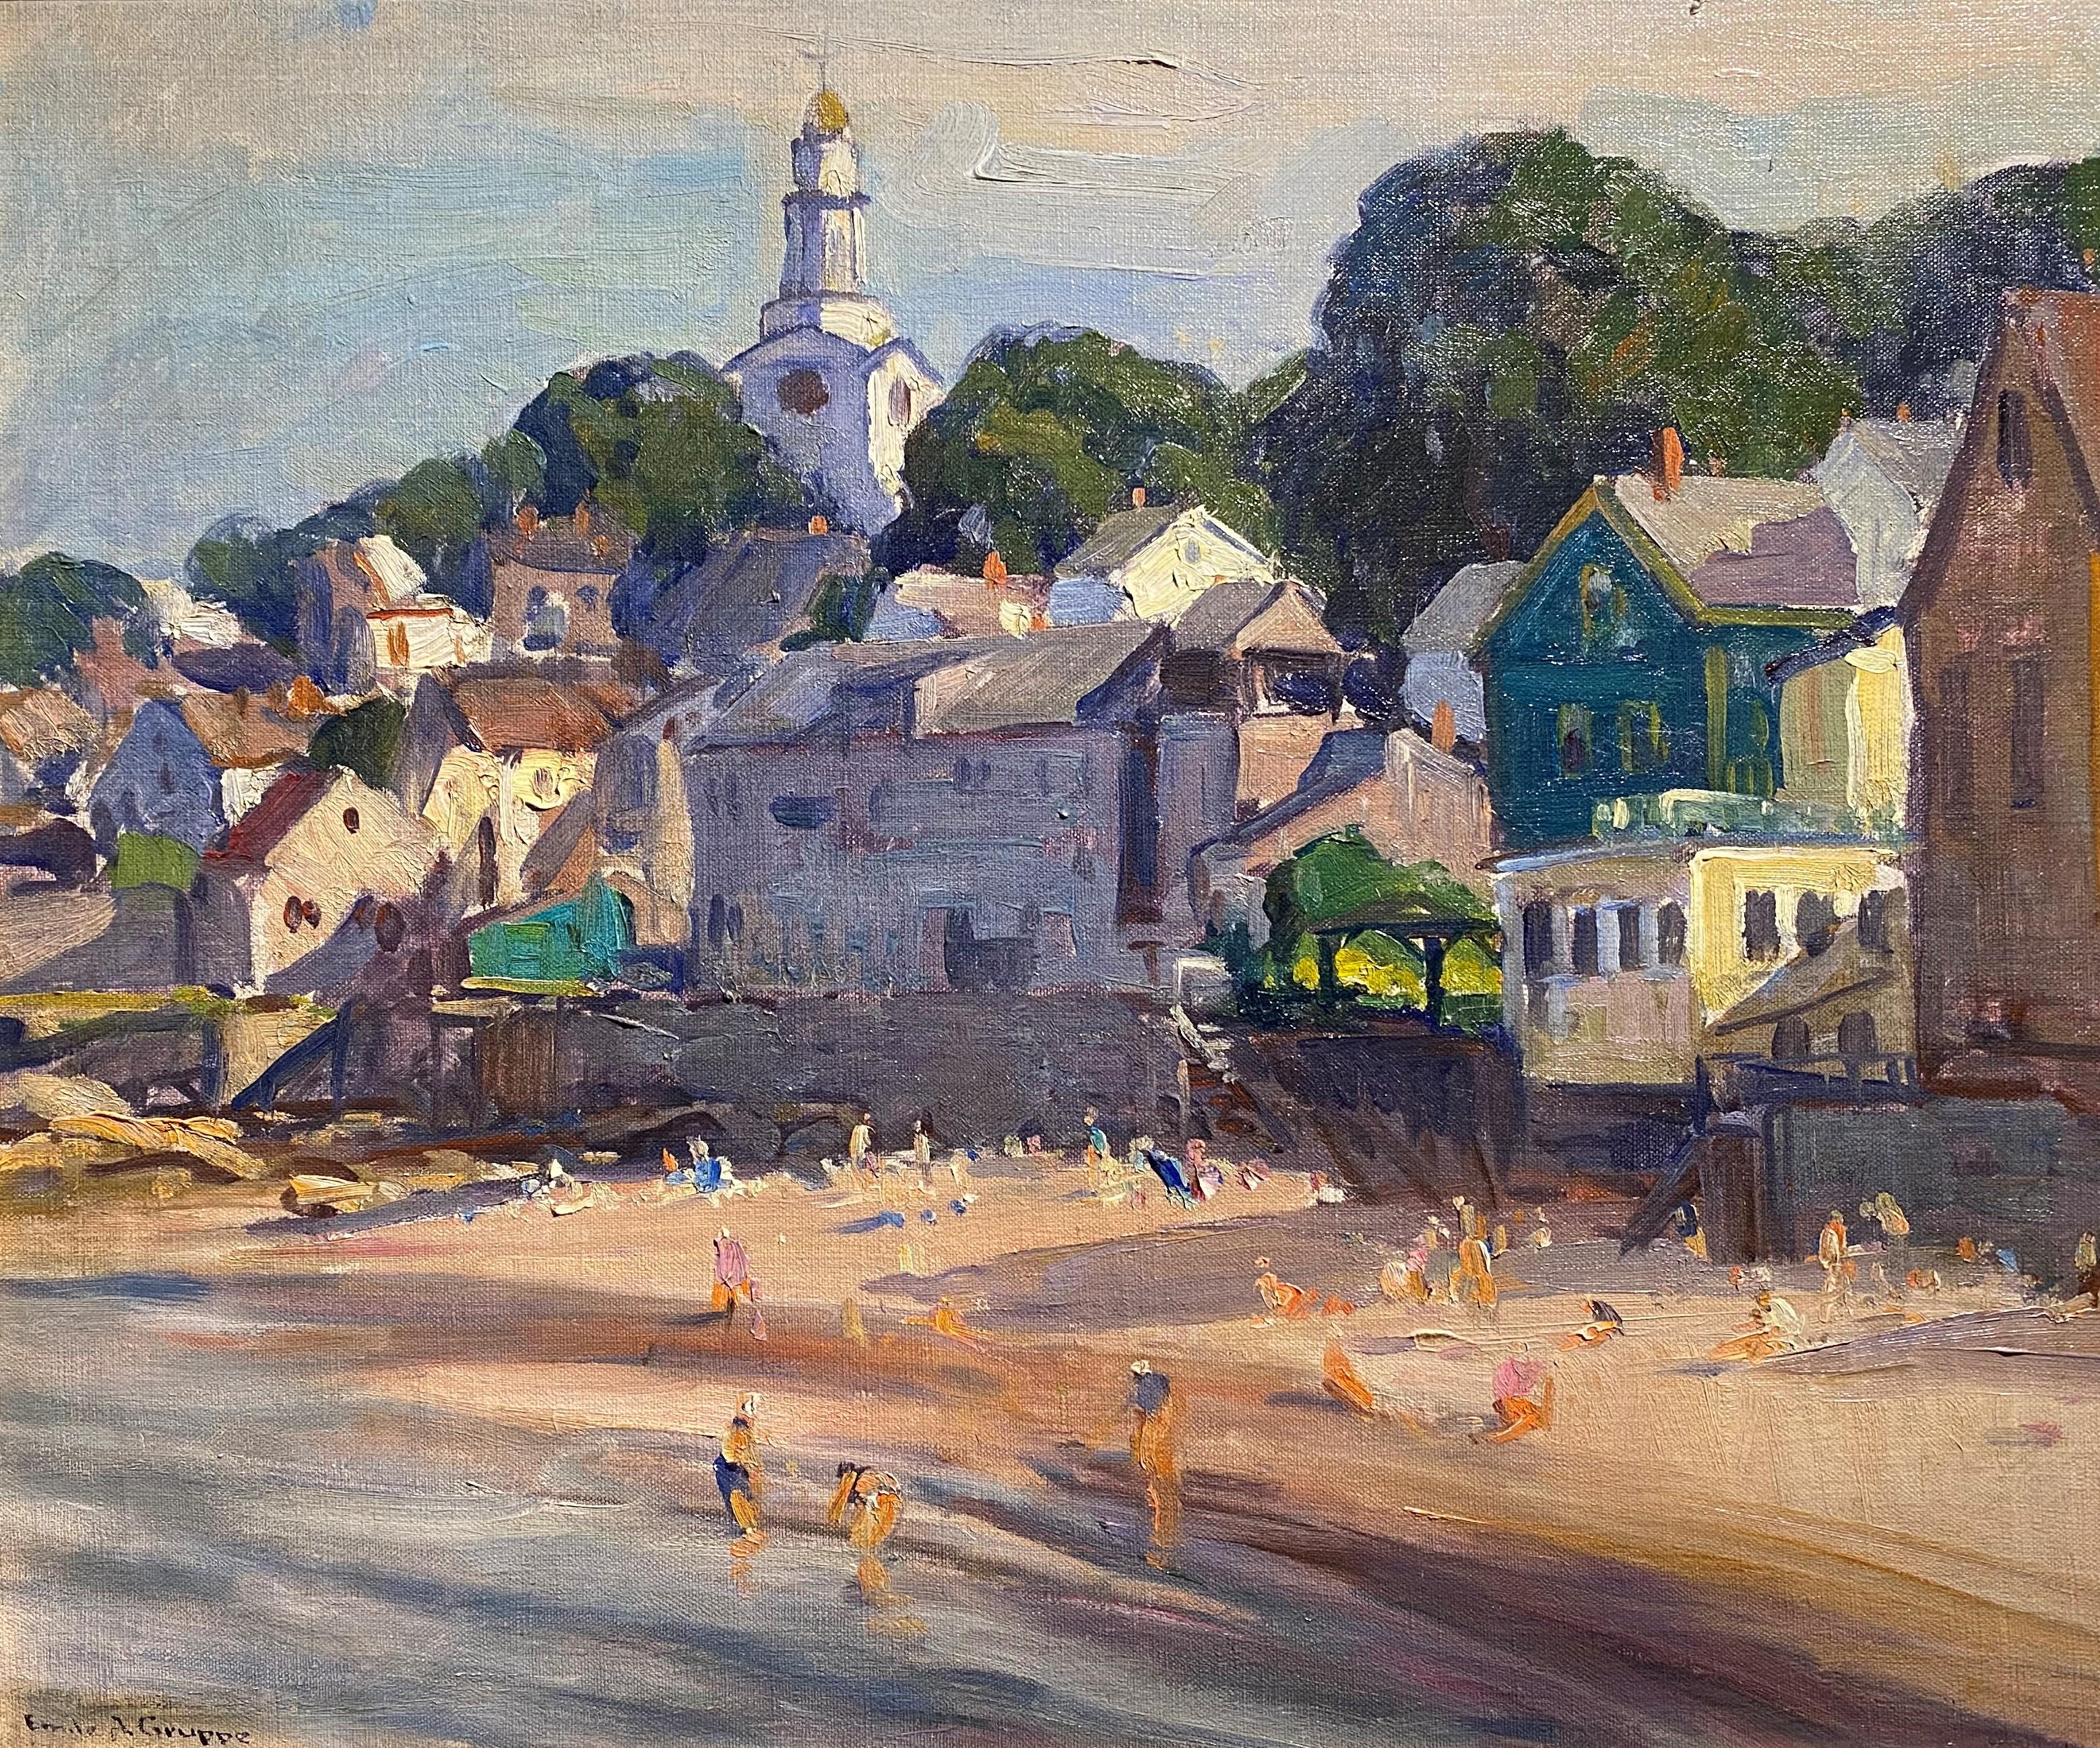 Front Beach, Rockport - Painting by Emile Albert Gruppe